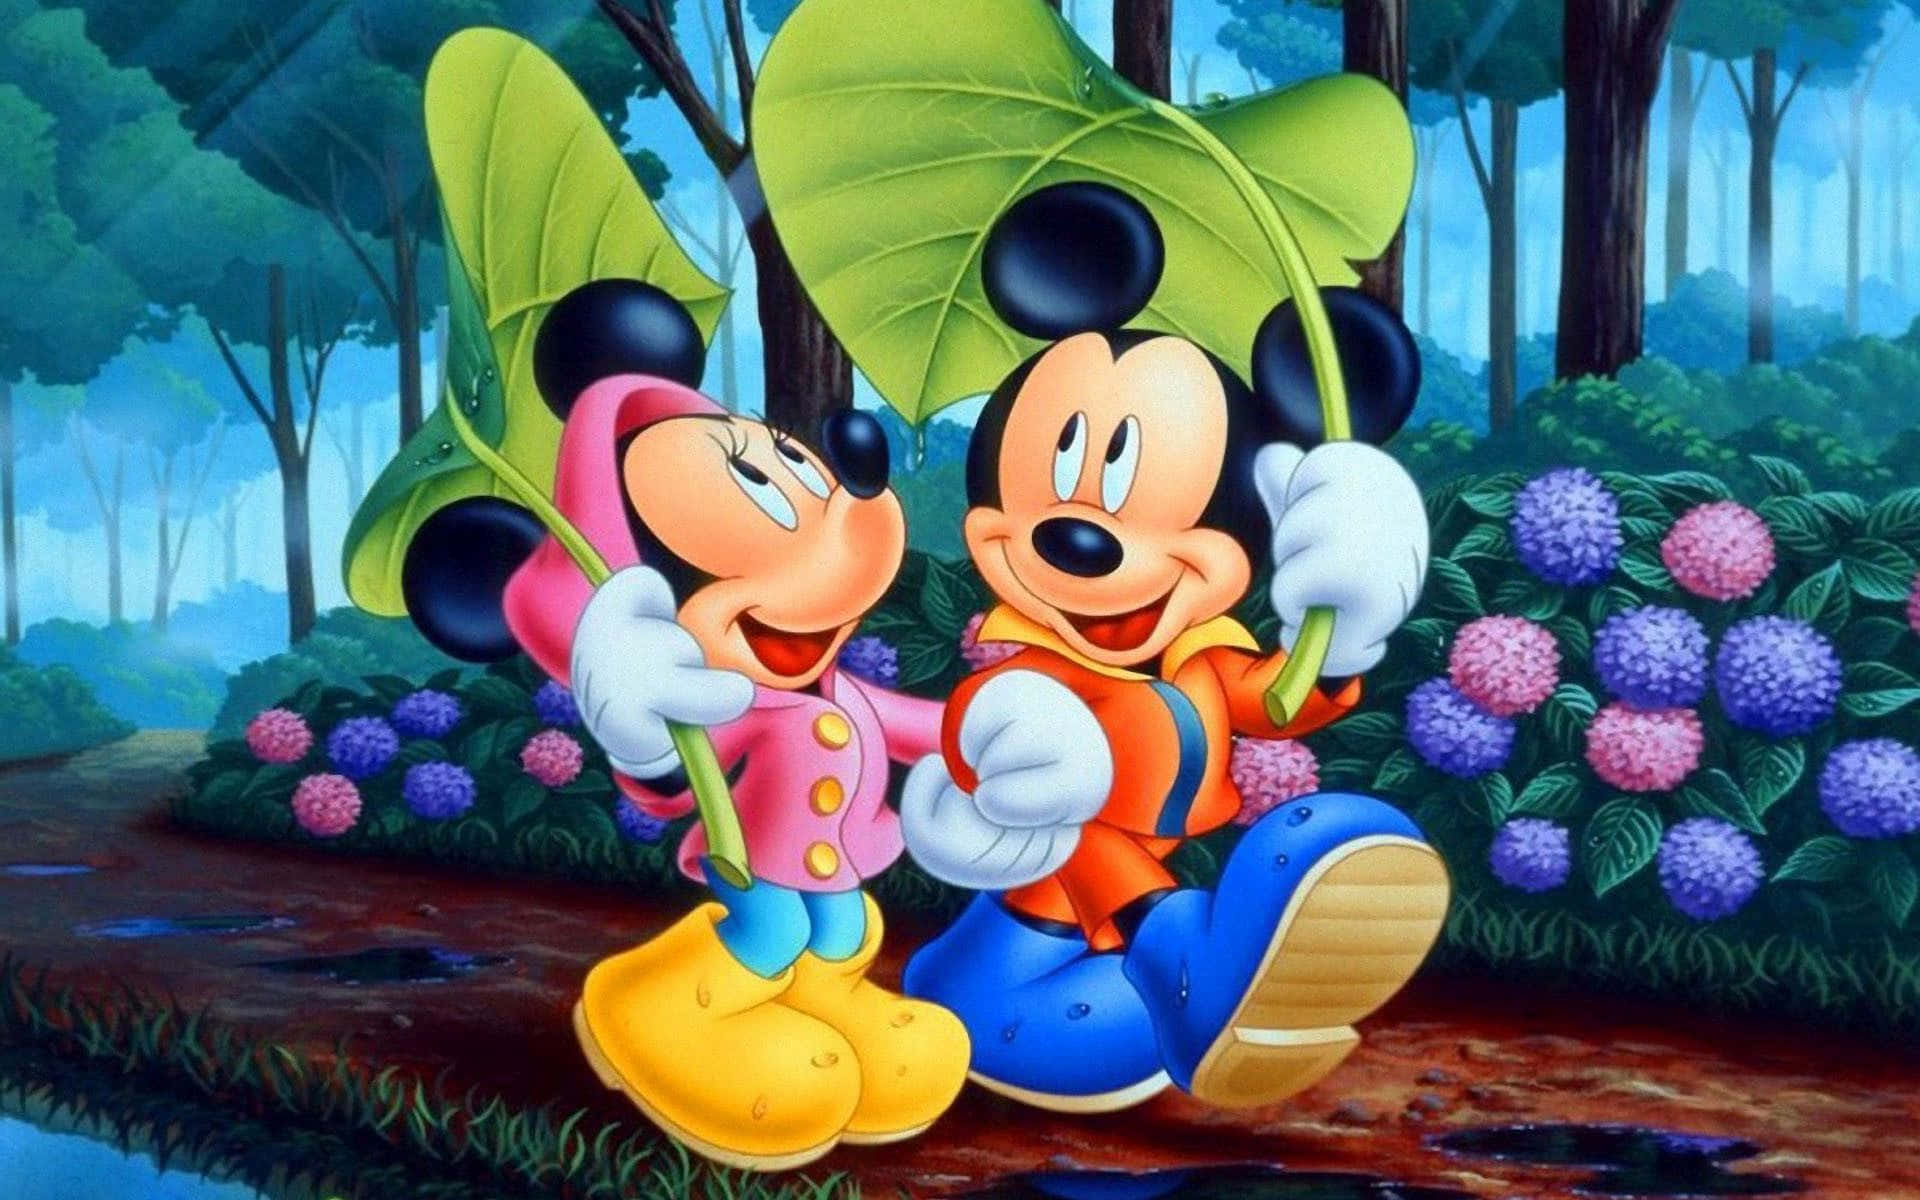 Everyone's Favorite Duo, Mickey and Minnie Mouse!